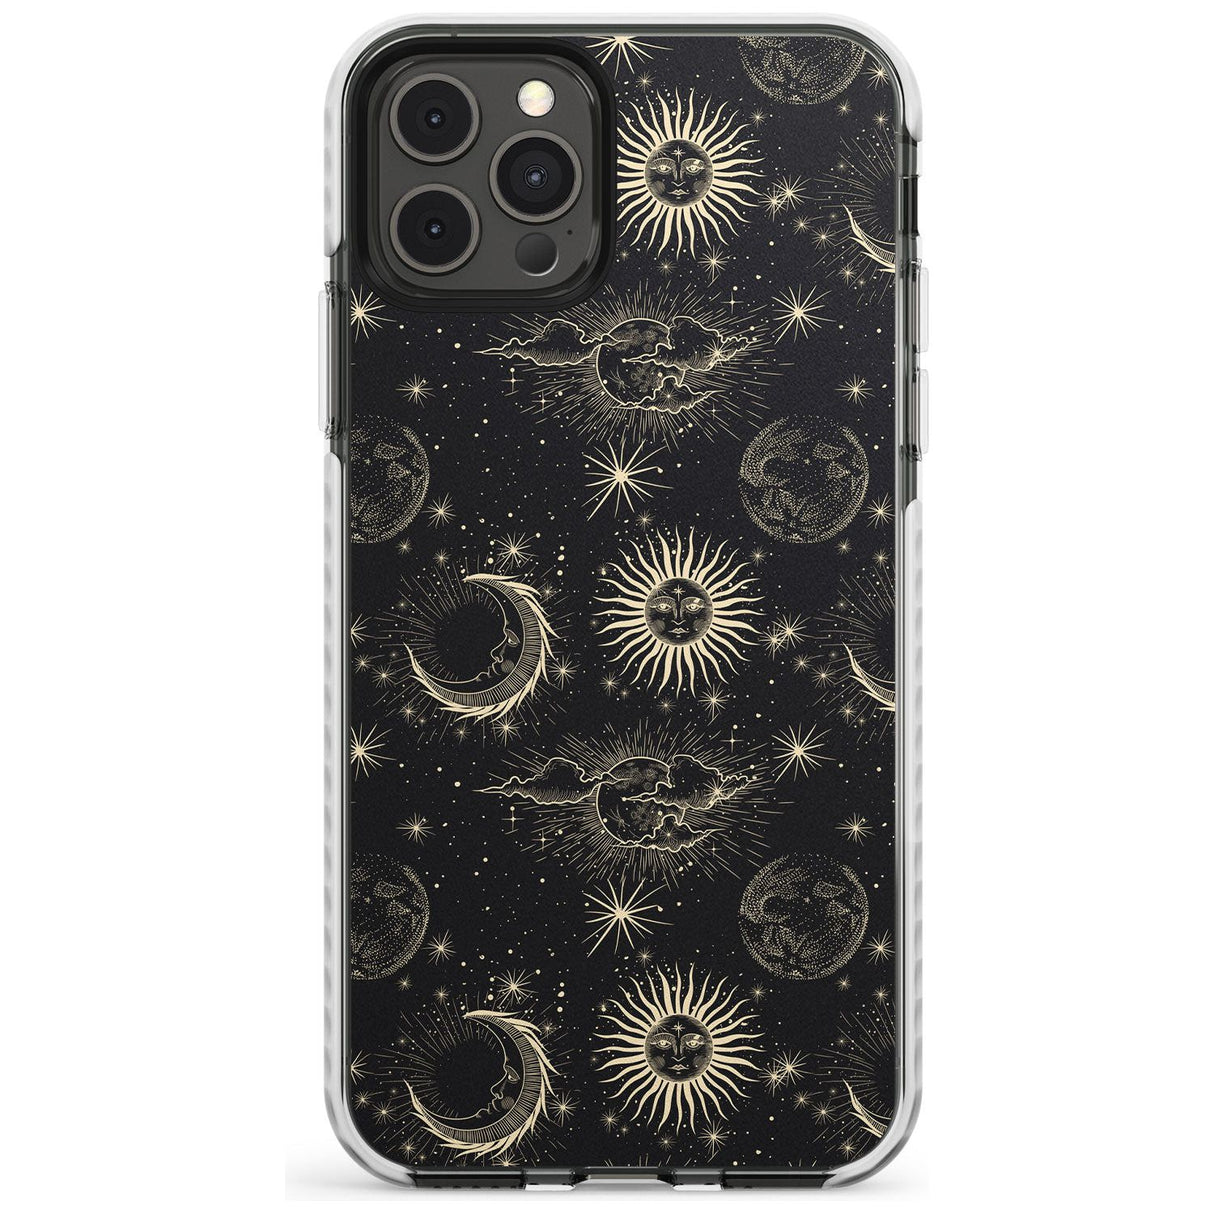 Large Suns, Moons & Clouds Slim TPU Phone Case for iPhone 11 Pro Max